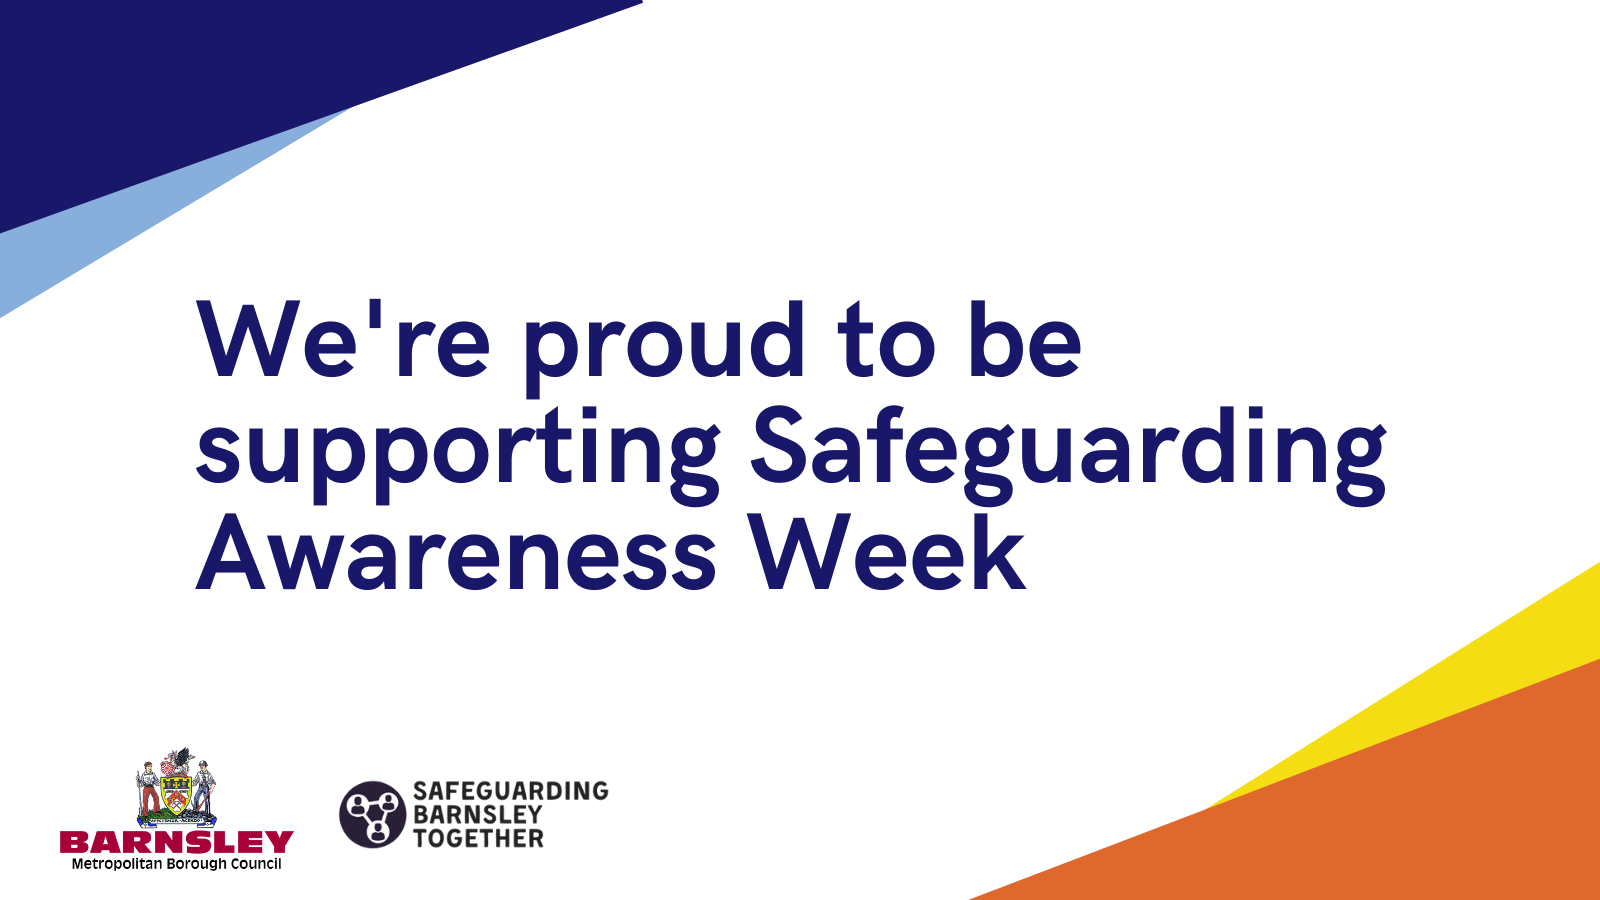 We're proud to be supporting Safeguarding Awareness Week